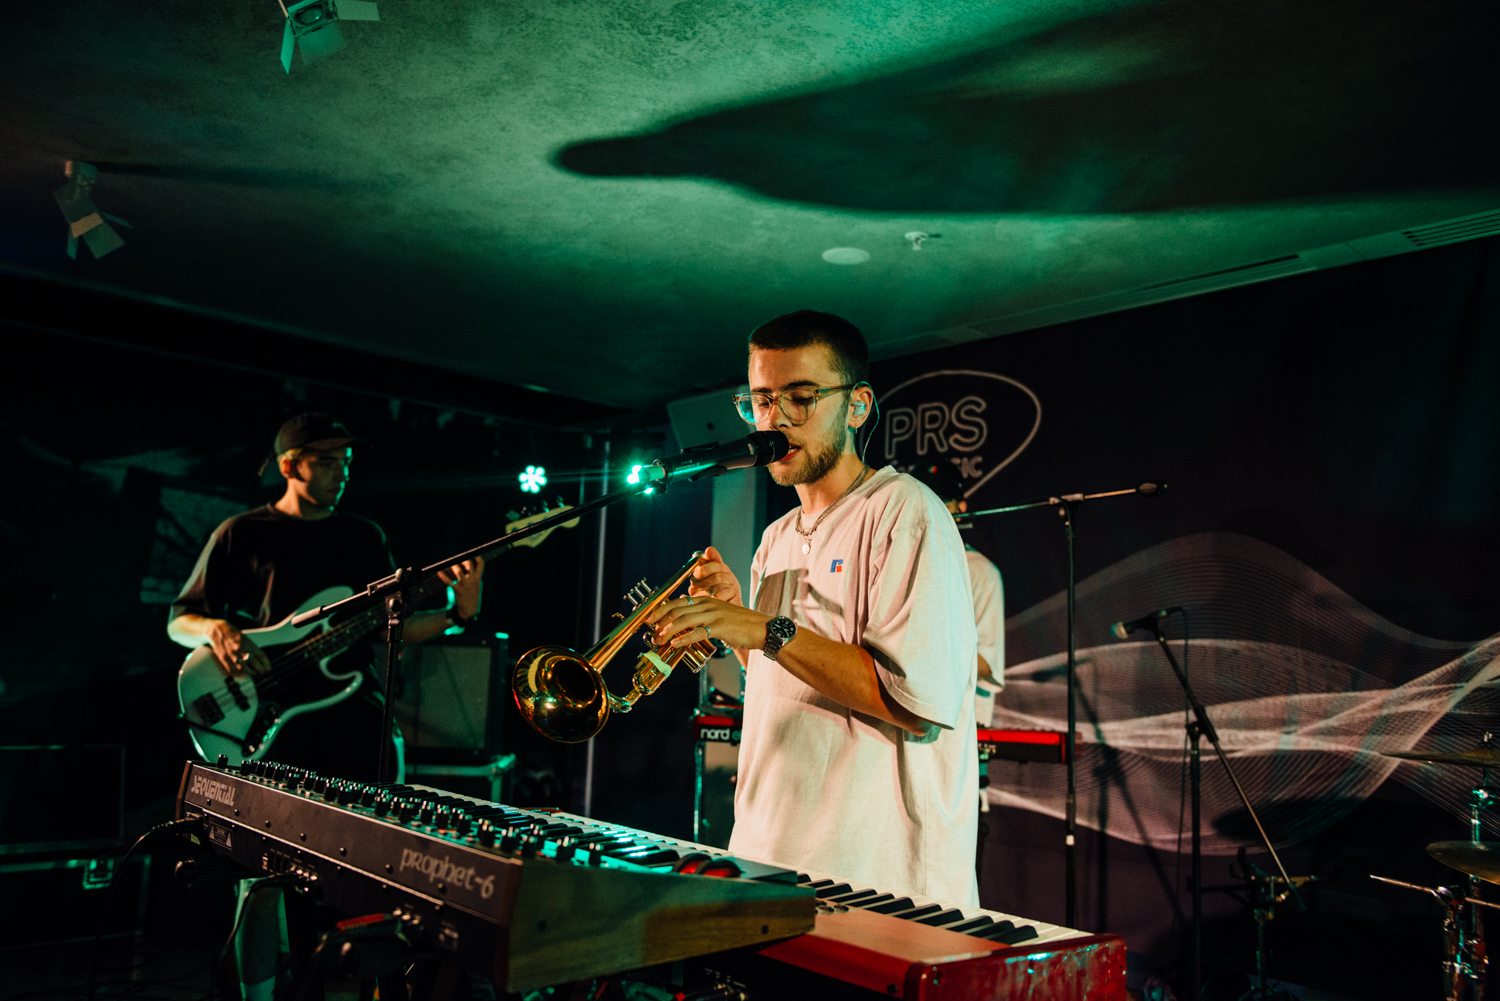 Easy Life perform at PRS presents July 2019